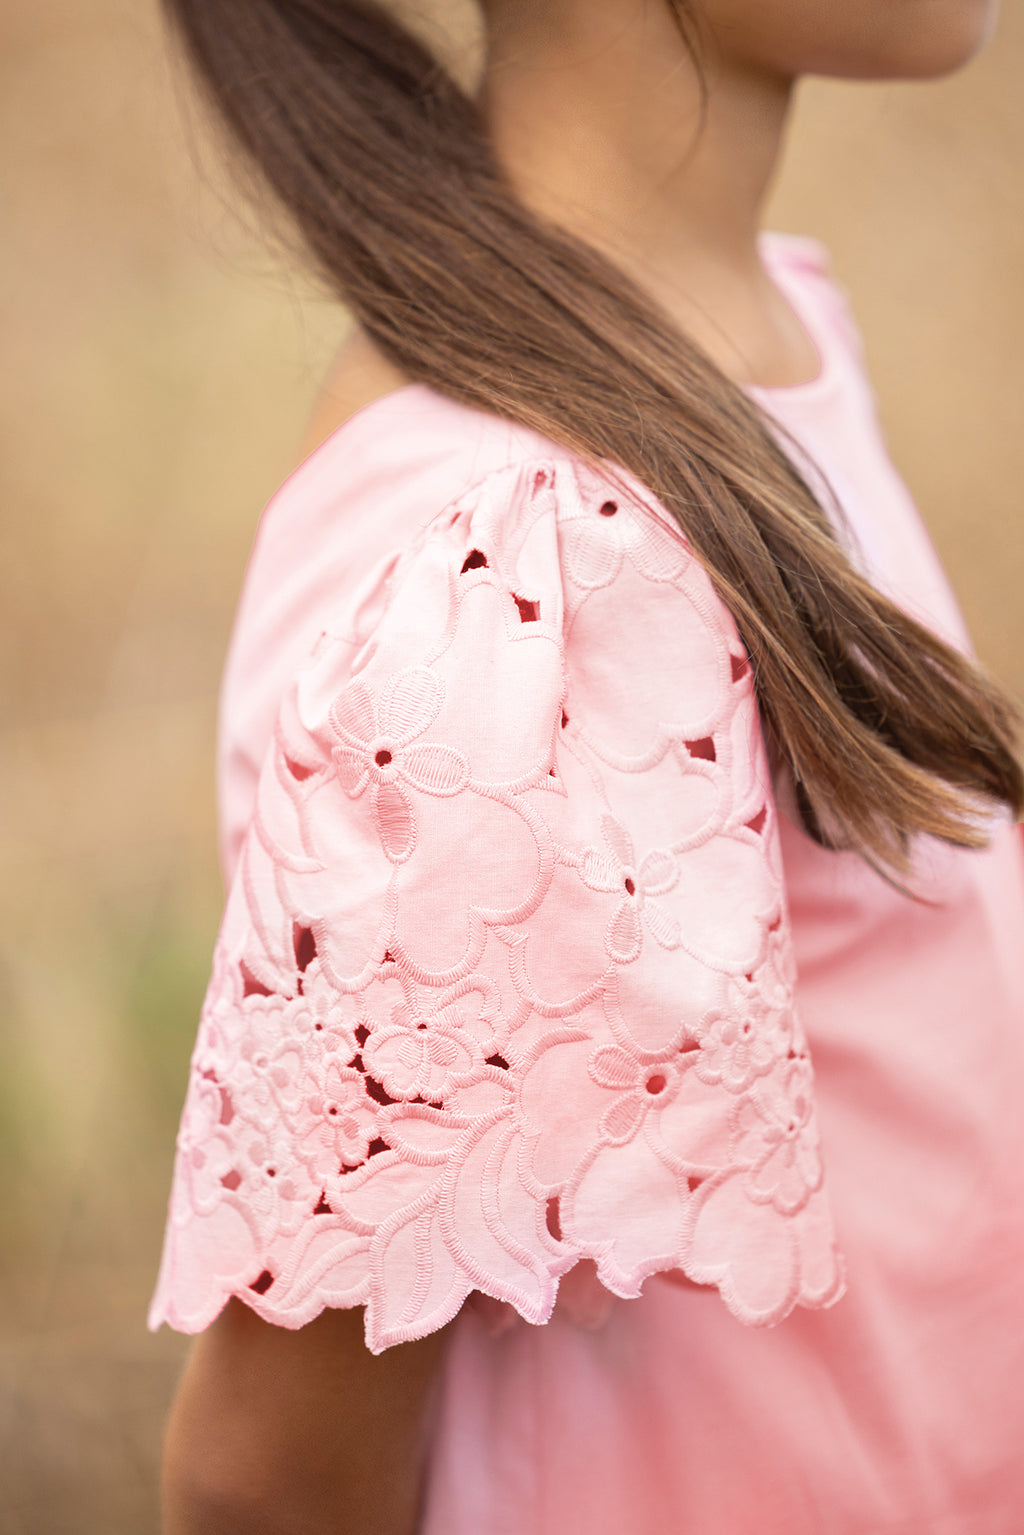 Dress - Pink Cotton embroidery